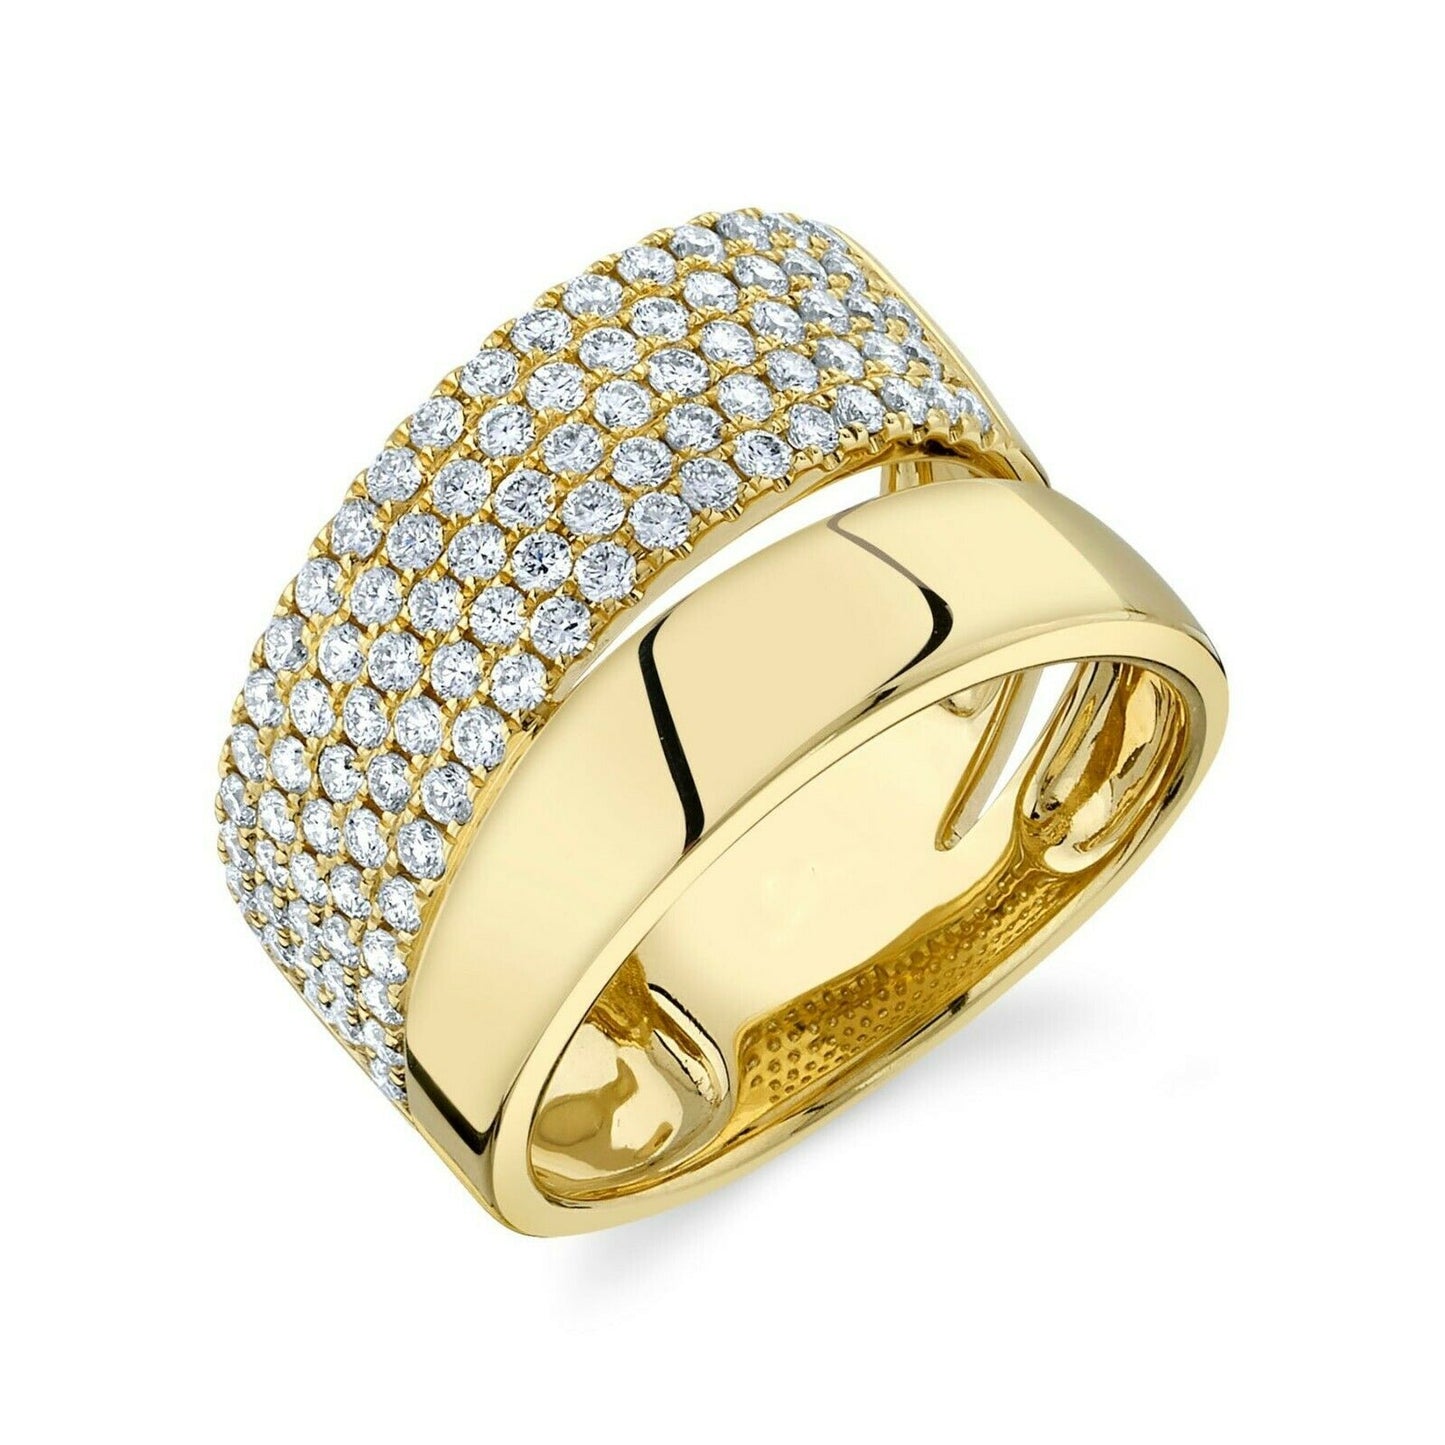 14K Gold 1.03CT Diamond Pave Cocktail Ring Right Hand Wide Statement